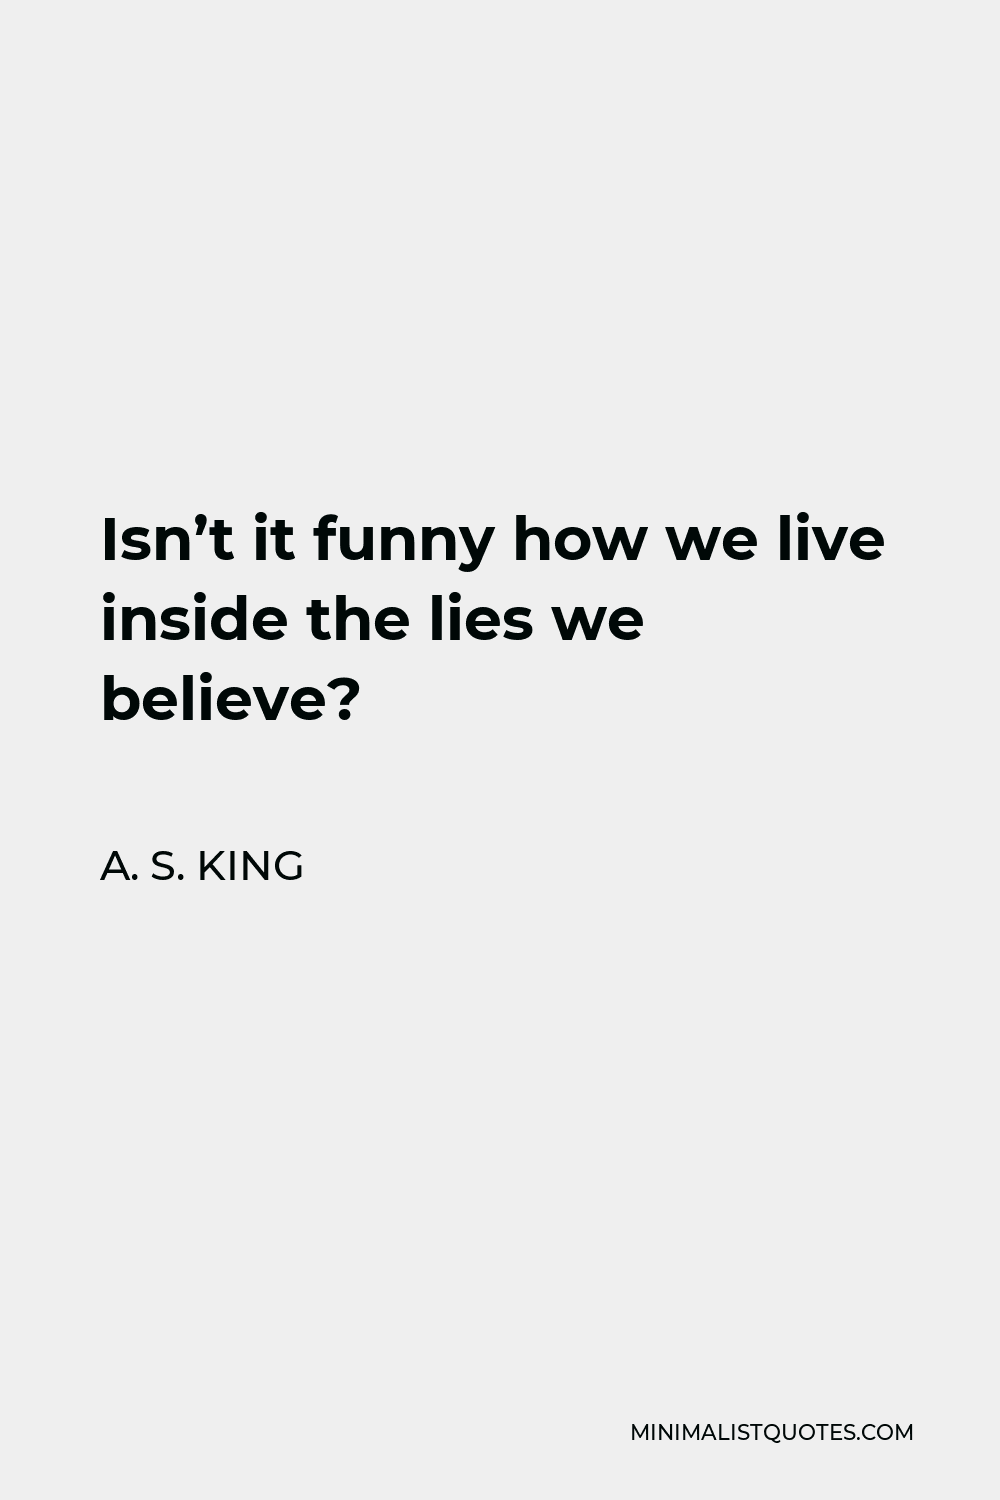 A. S. King Quote - Isn’t it funny how we live inside the lies we believe?